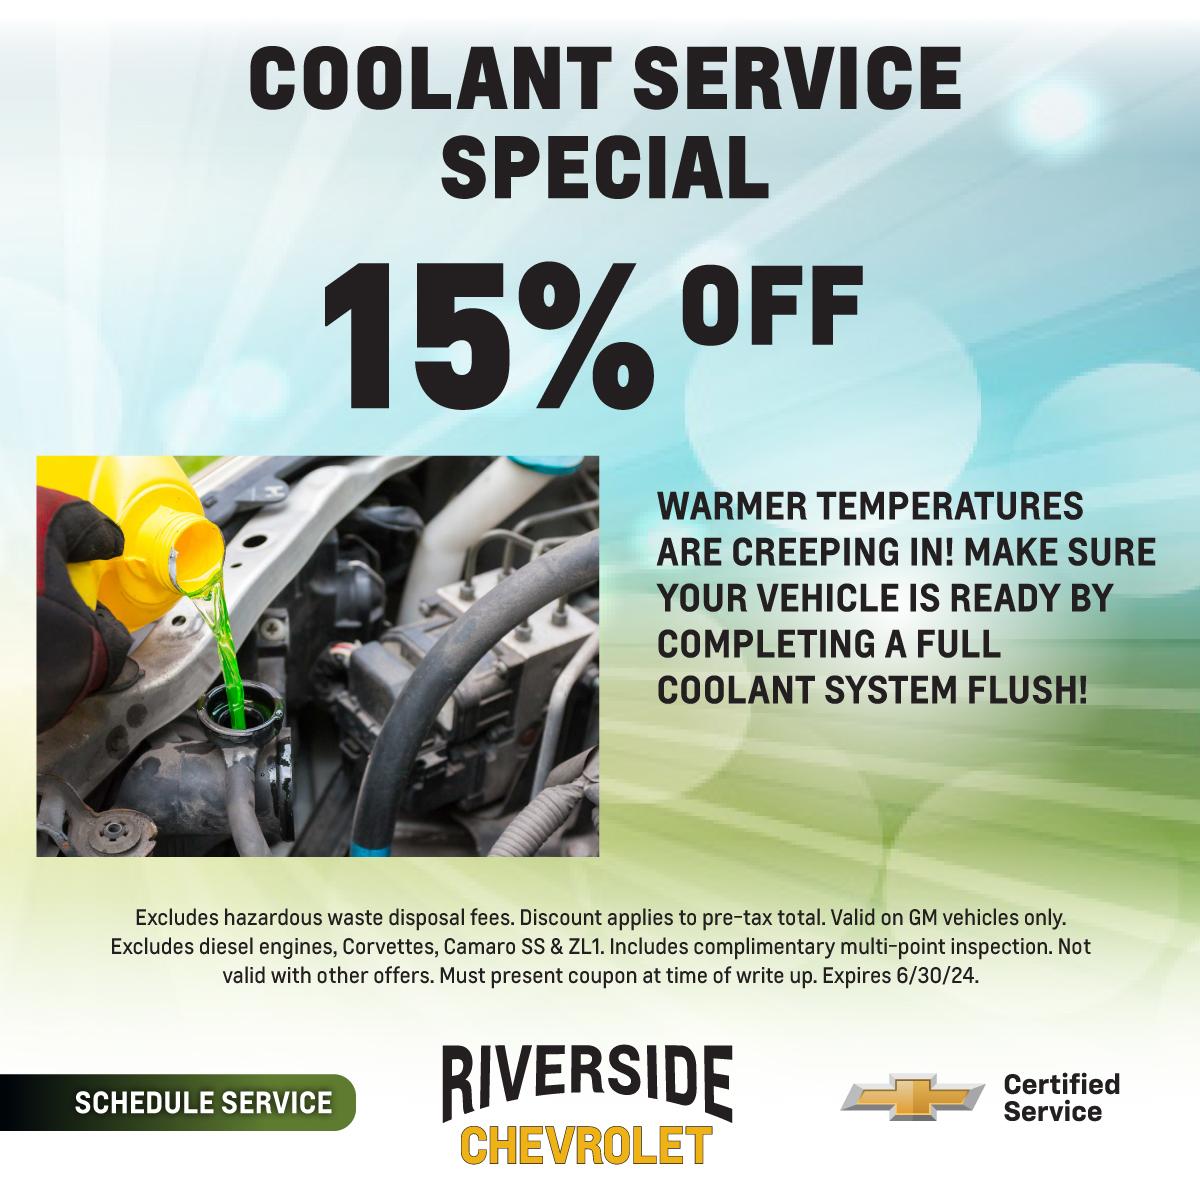 COOLANT SERVICE SPECIAL